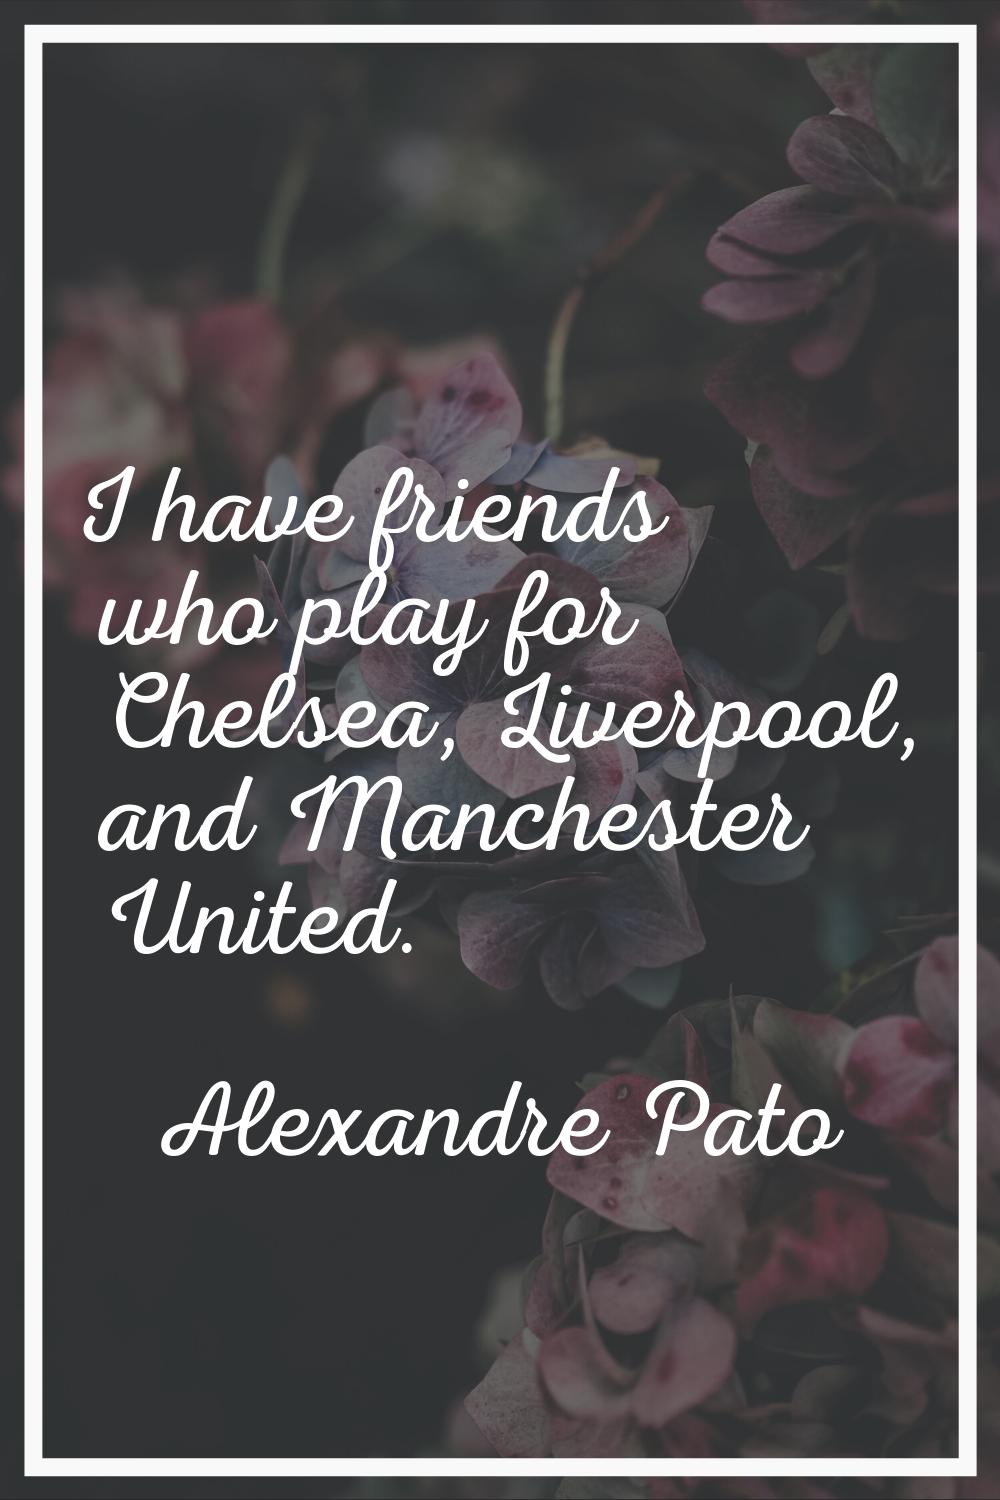 I have friends who play for Chelsea, Liverpool, and Manchester United.